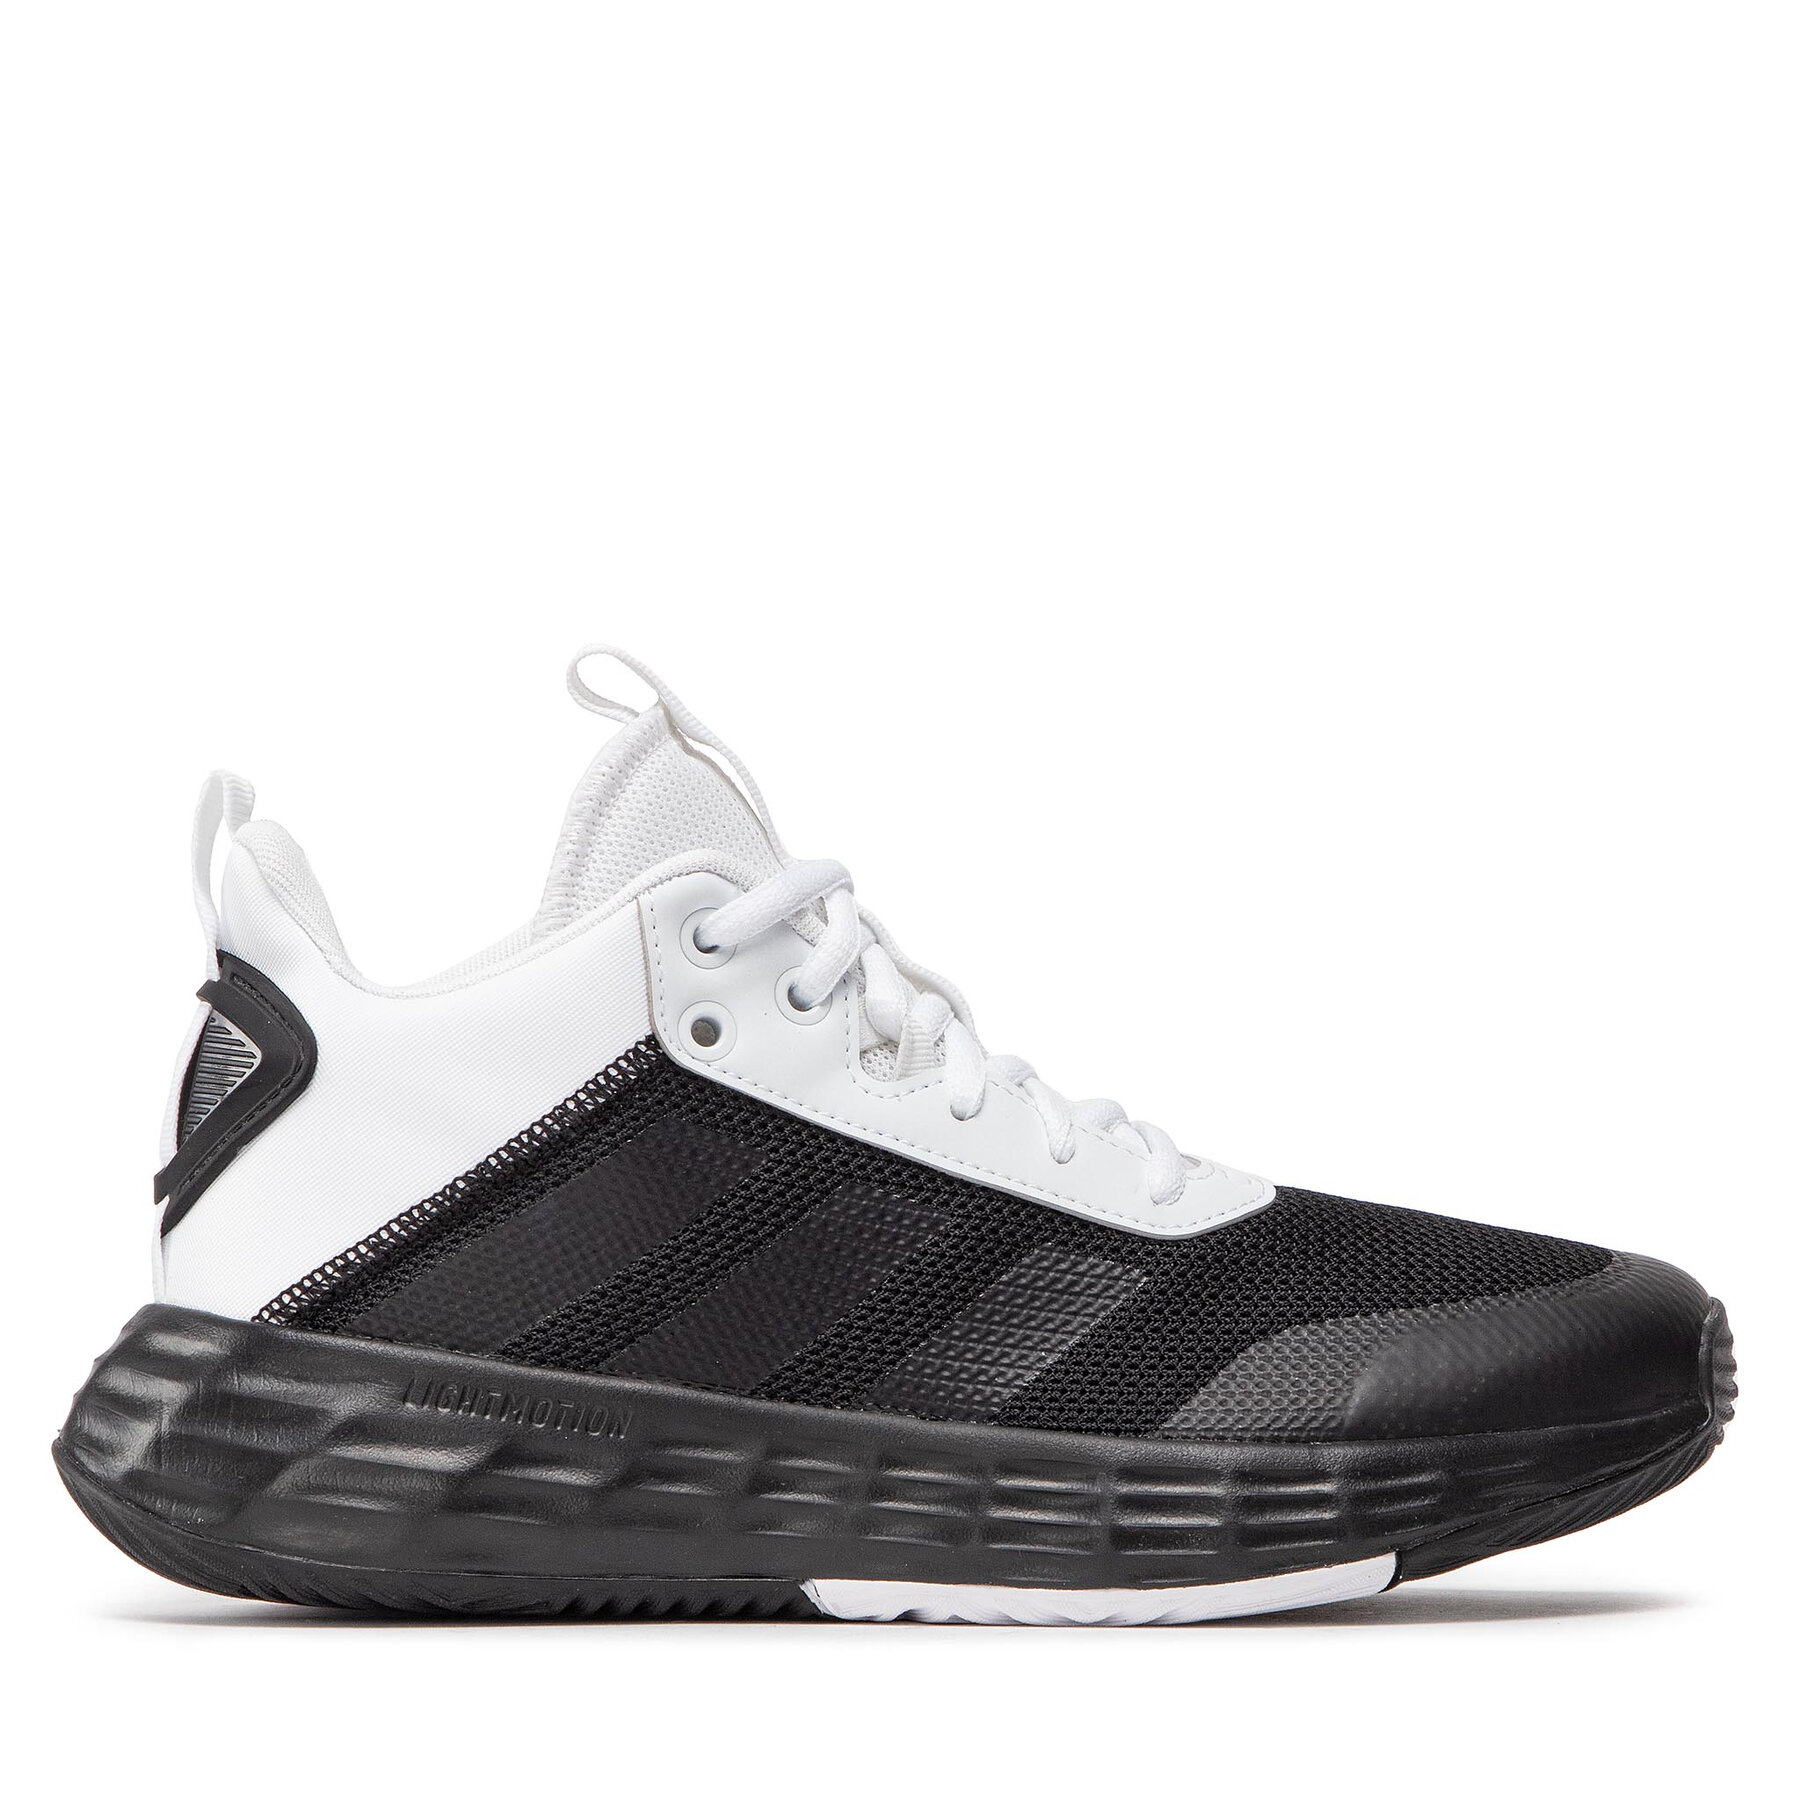 Sneakers adidas Ownthegame 2.0 GY9696 Noir